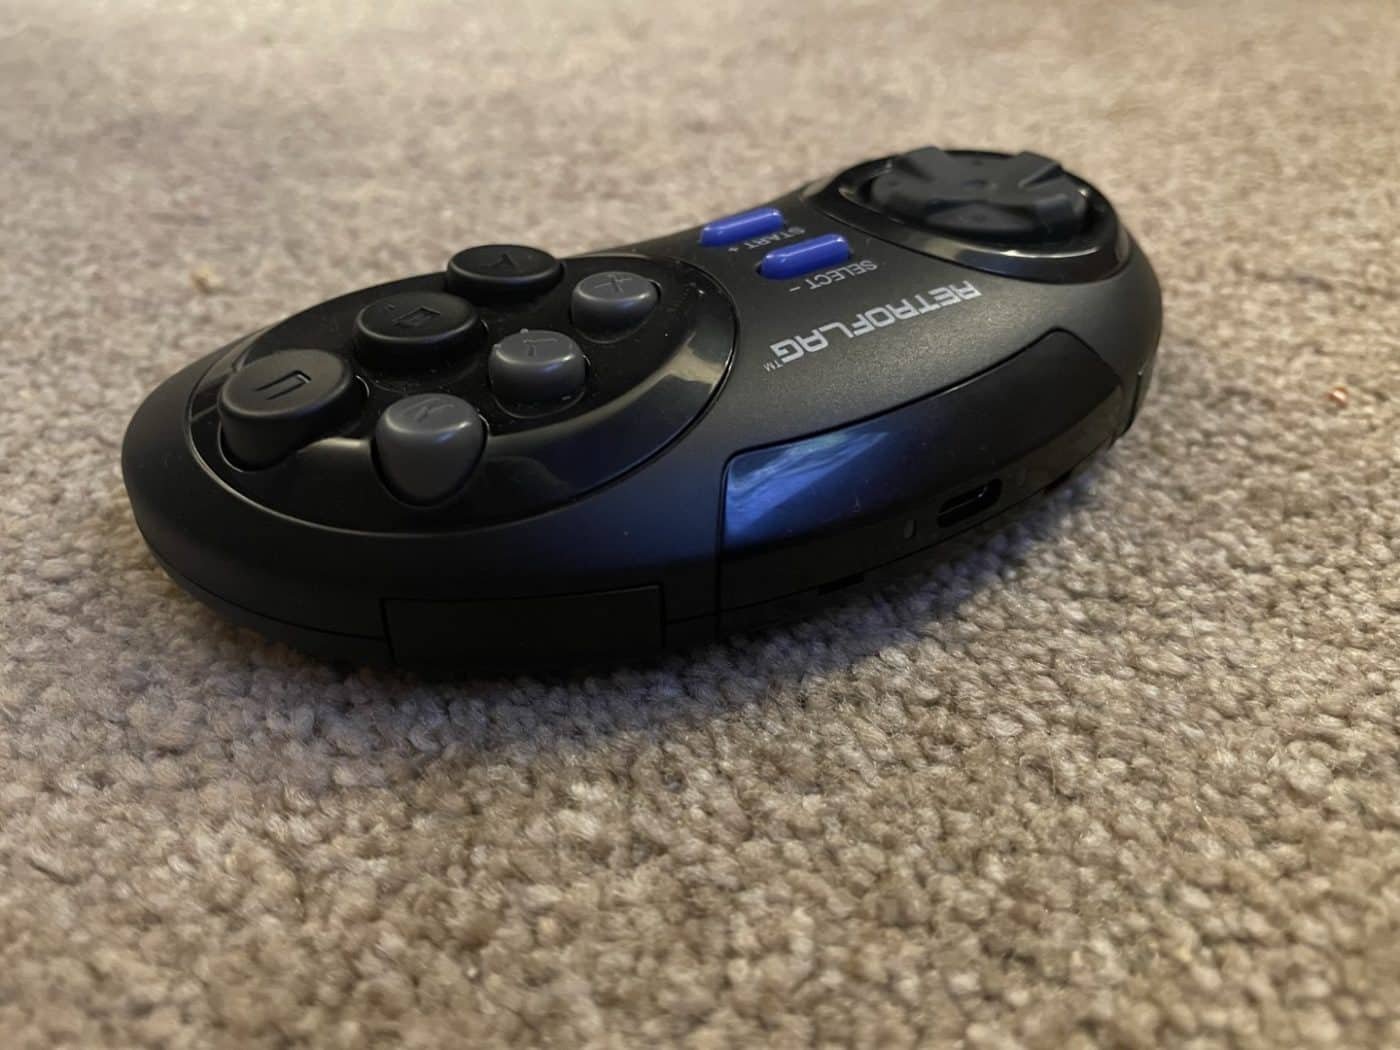 The retroflag classic 2. 4g controller-m is compact, but surprisingly comfortable.